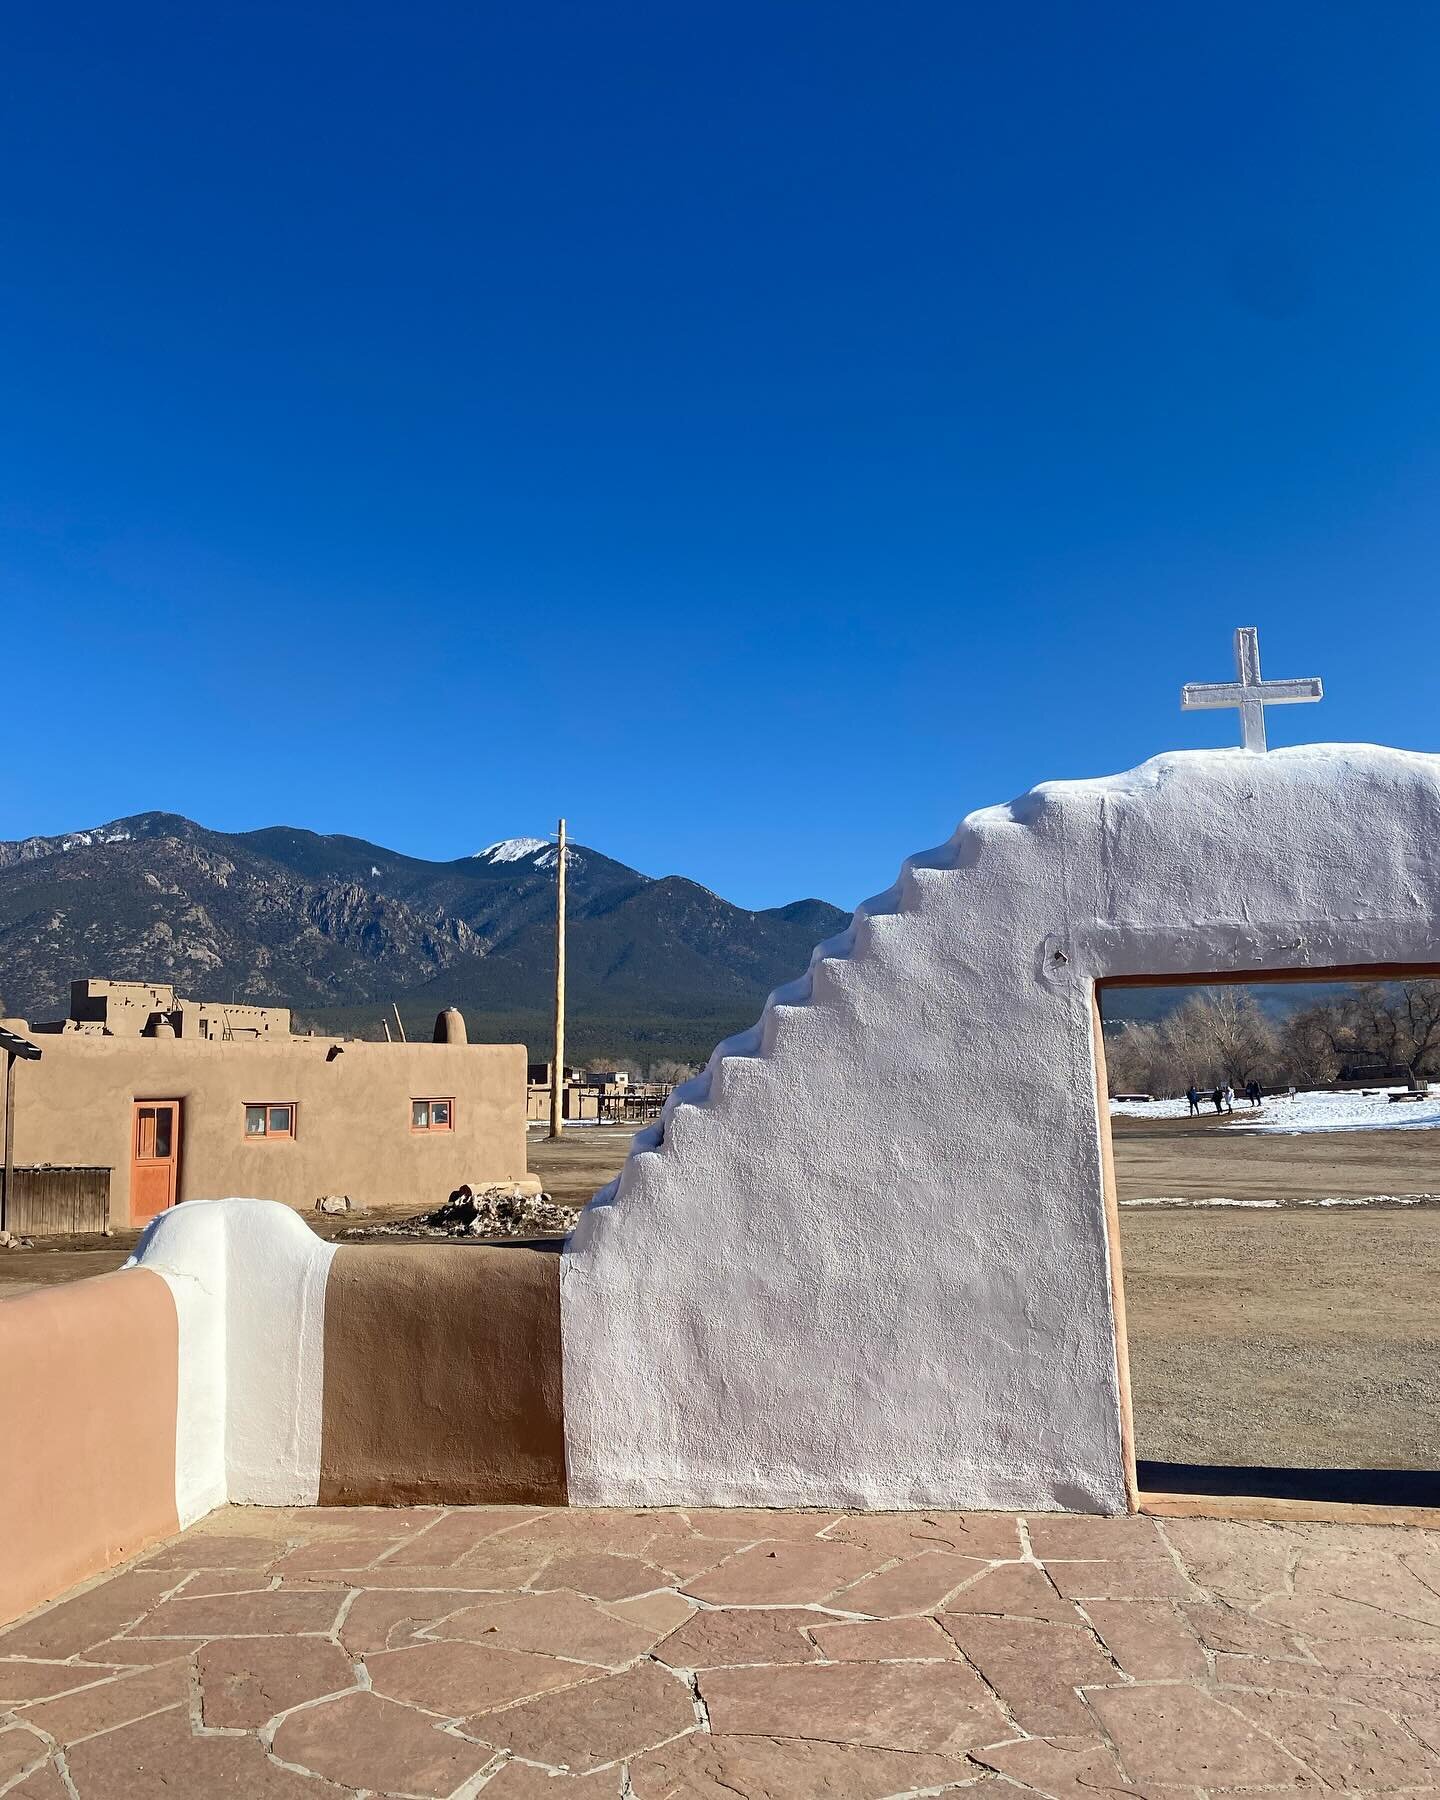 This year has included some time with great friends and family. Travel, art, making, seeing, doing and more. Here is 2023 in 10 images, in no particular order.
1. Taos Pueblo, New Mexico 
2. Amazing art in New Mexico
3. Gettysburg National Battlefiel